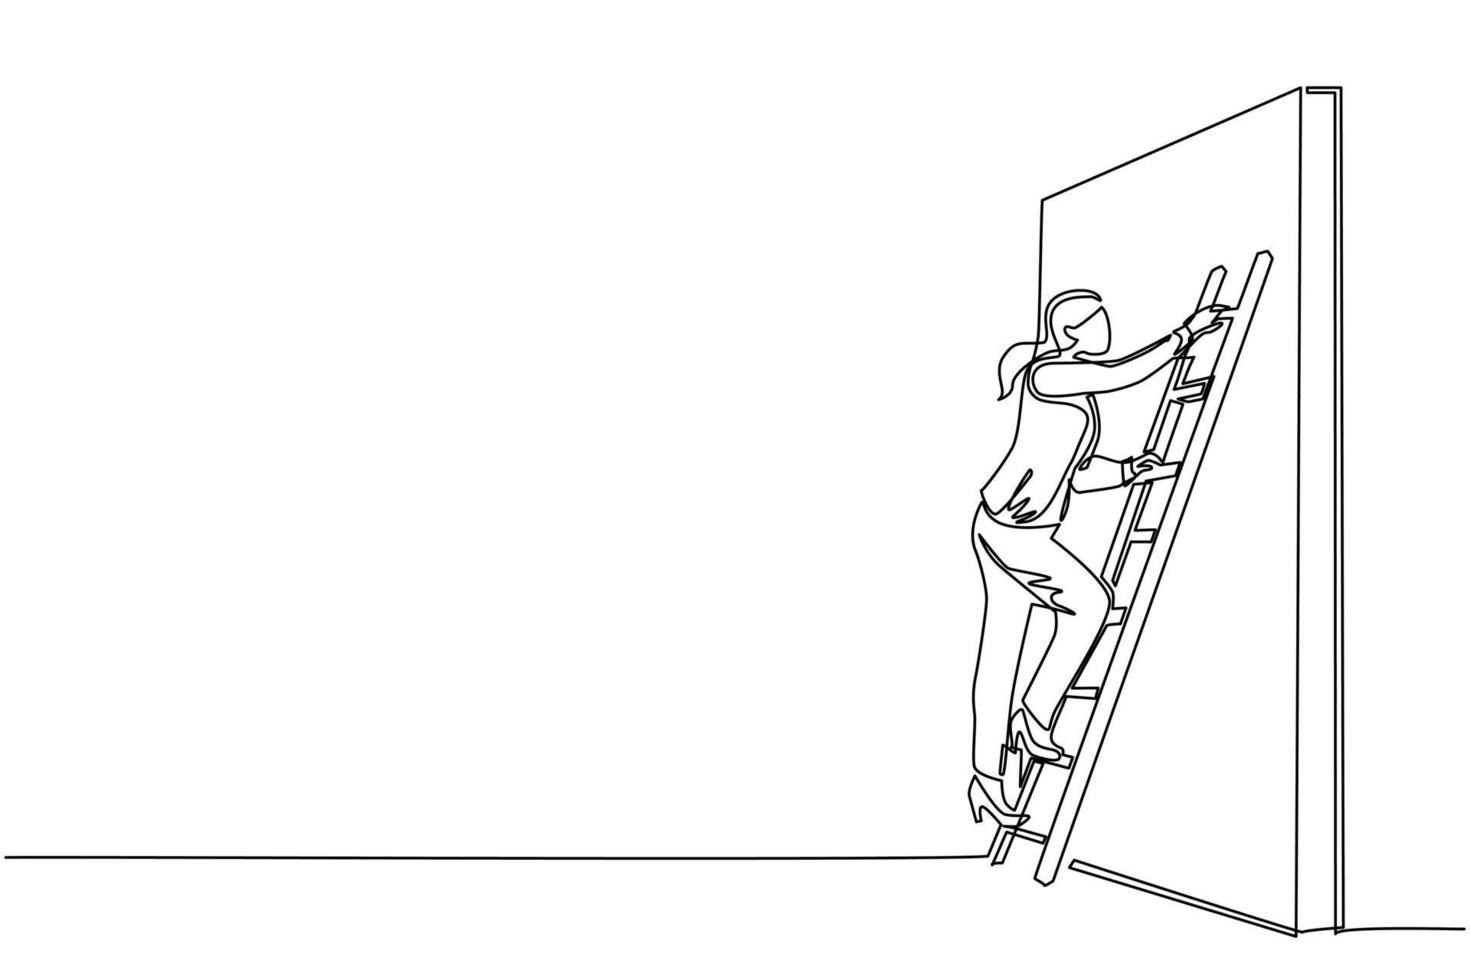 Continuous one line drawing businesswoman climbing up the wall with ladder. Business obstacle metaphor. Symbol for career growth, finding creative solution. Single line draw design vector illustration